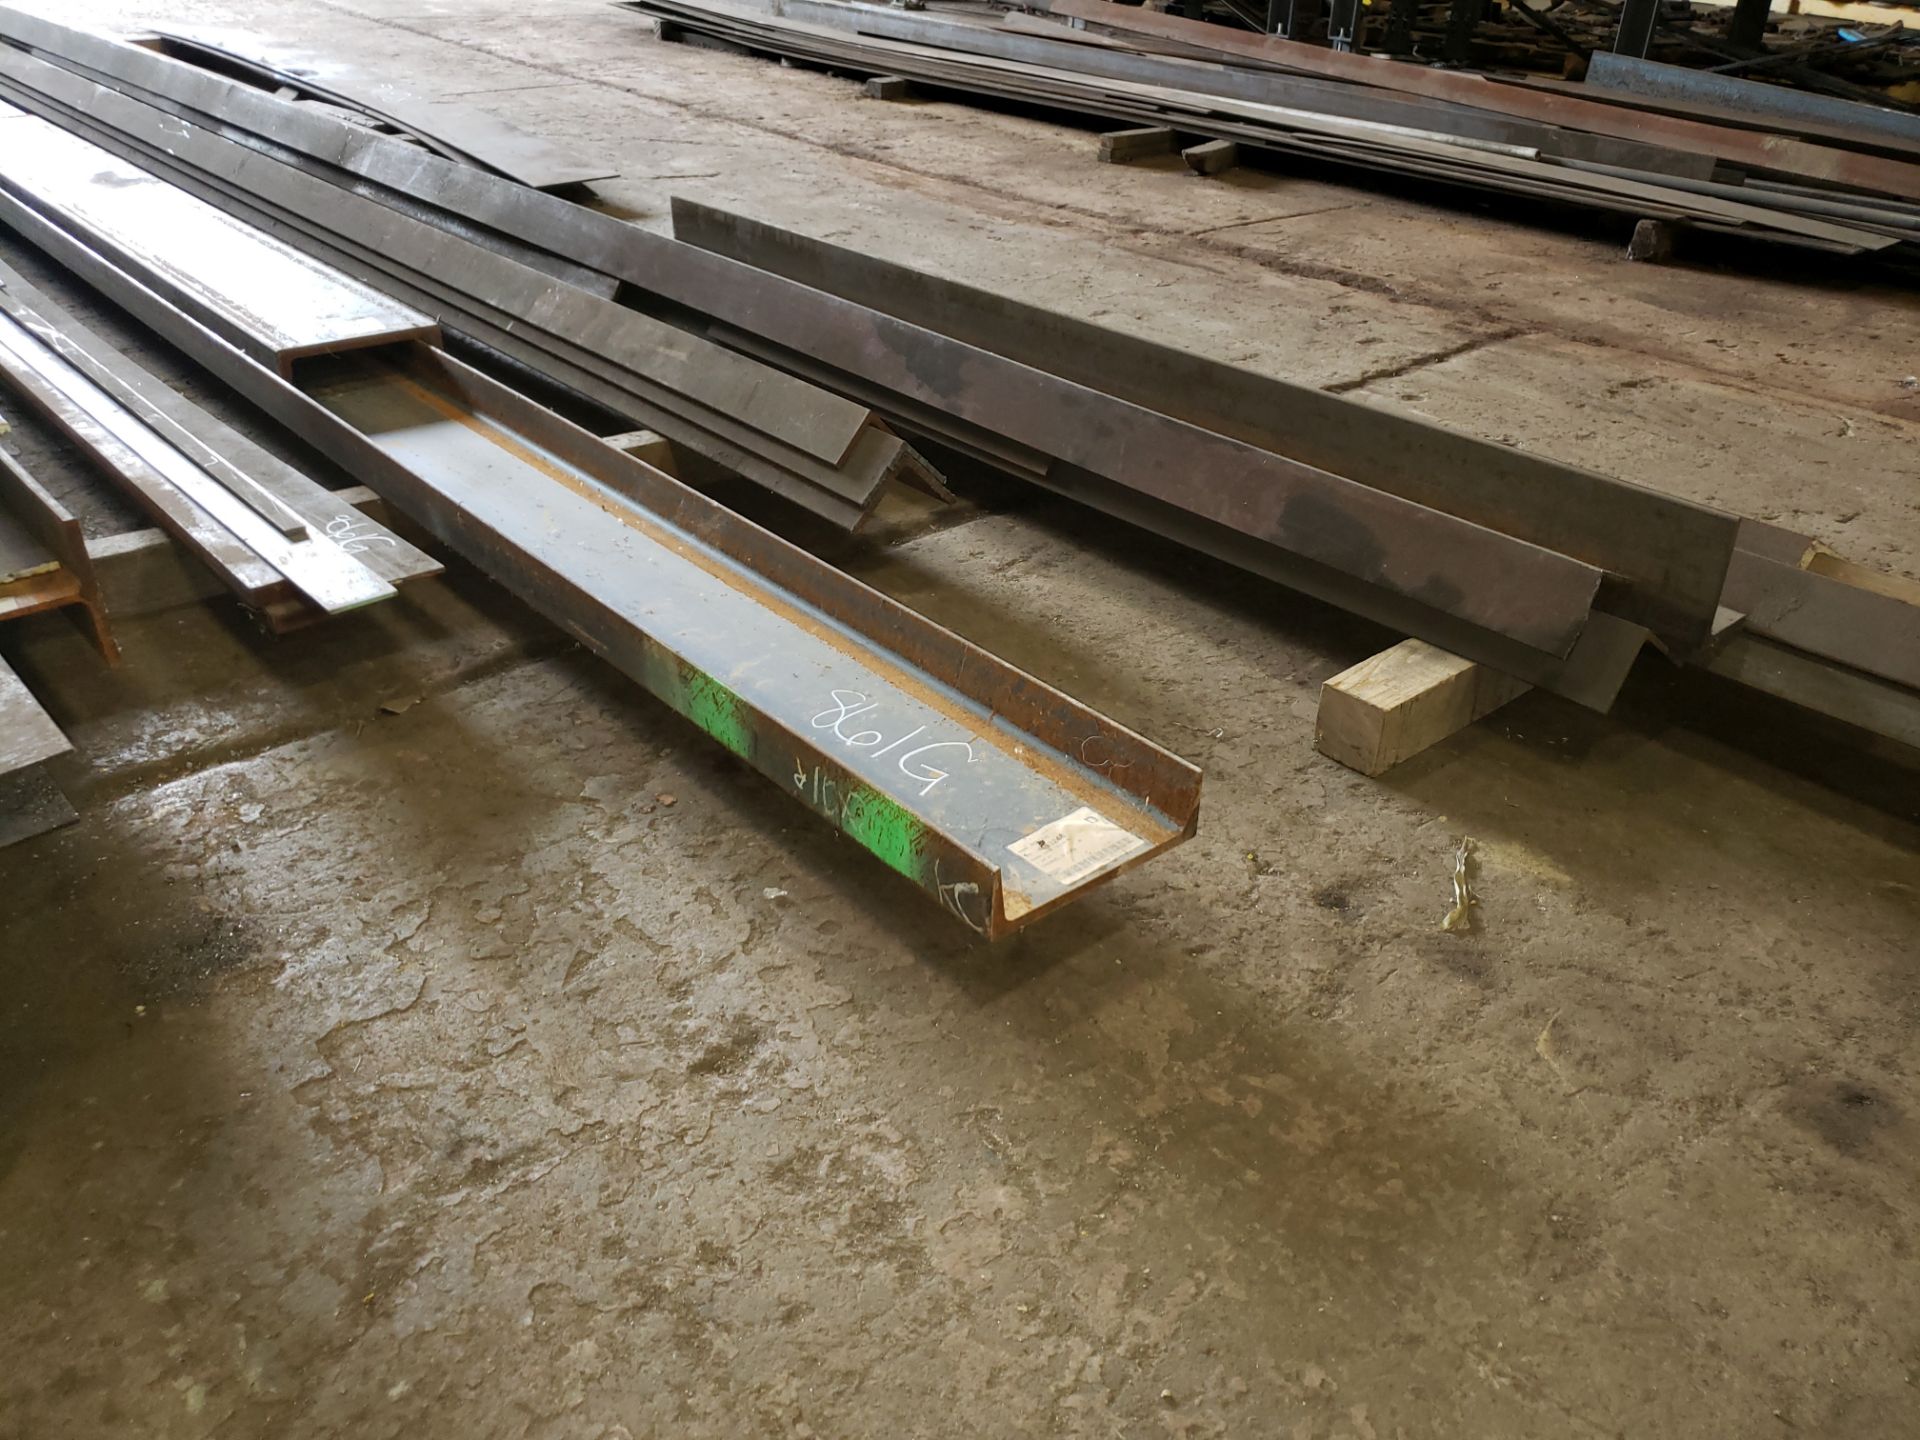 MISC. METALS: I BEAMS, FLAT STOCK, CHANNEL, ANGLE LOT - Image 2 of 2